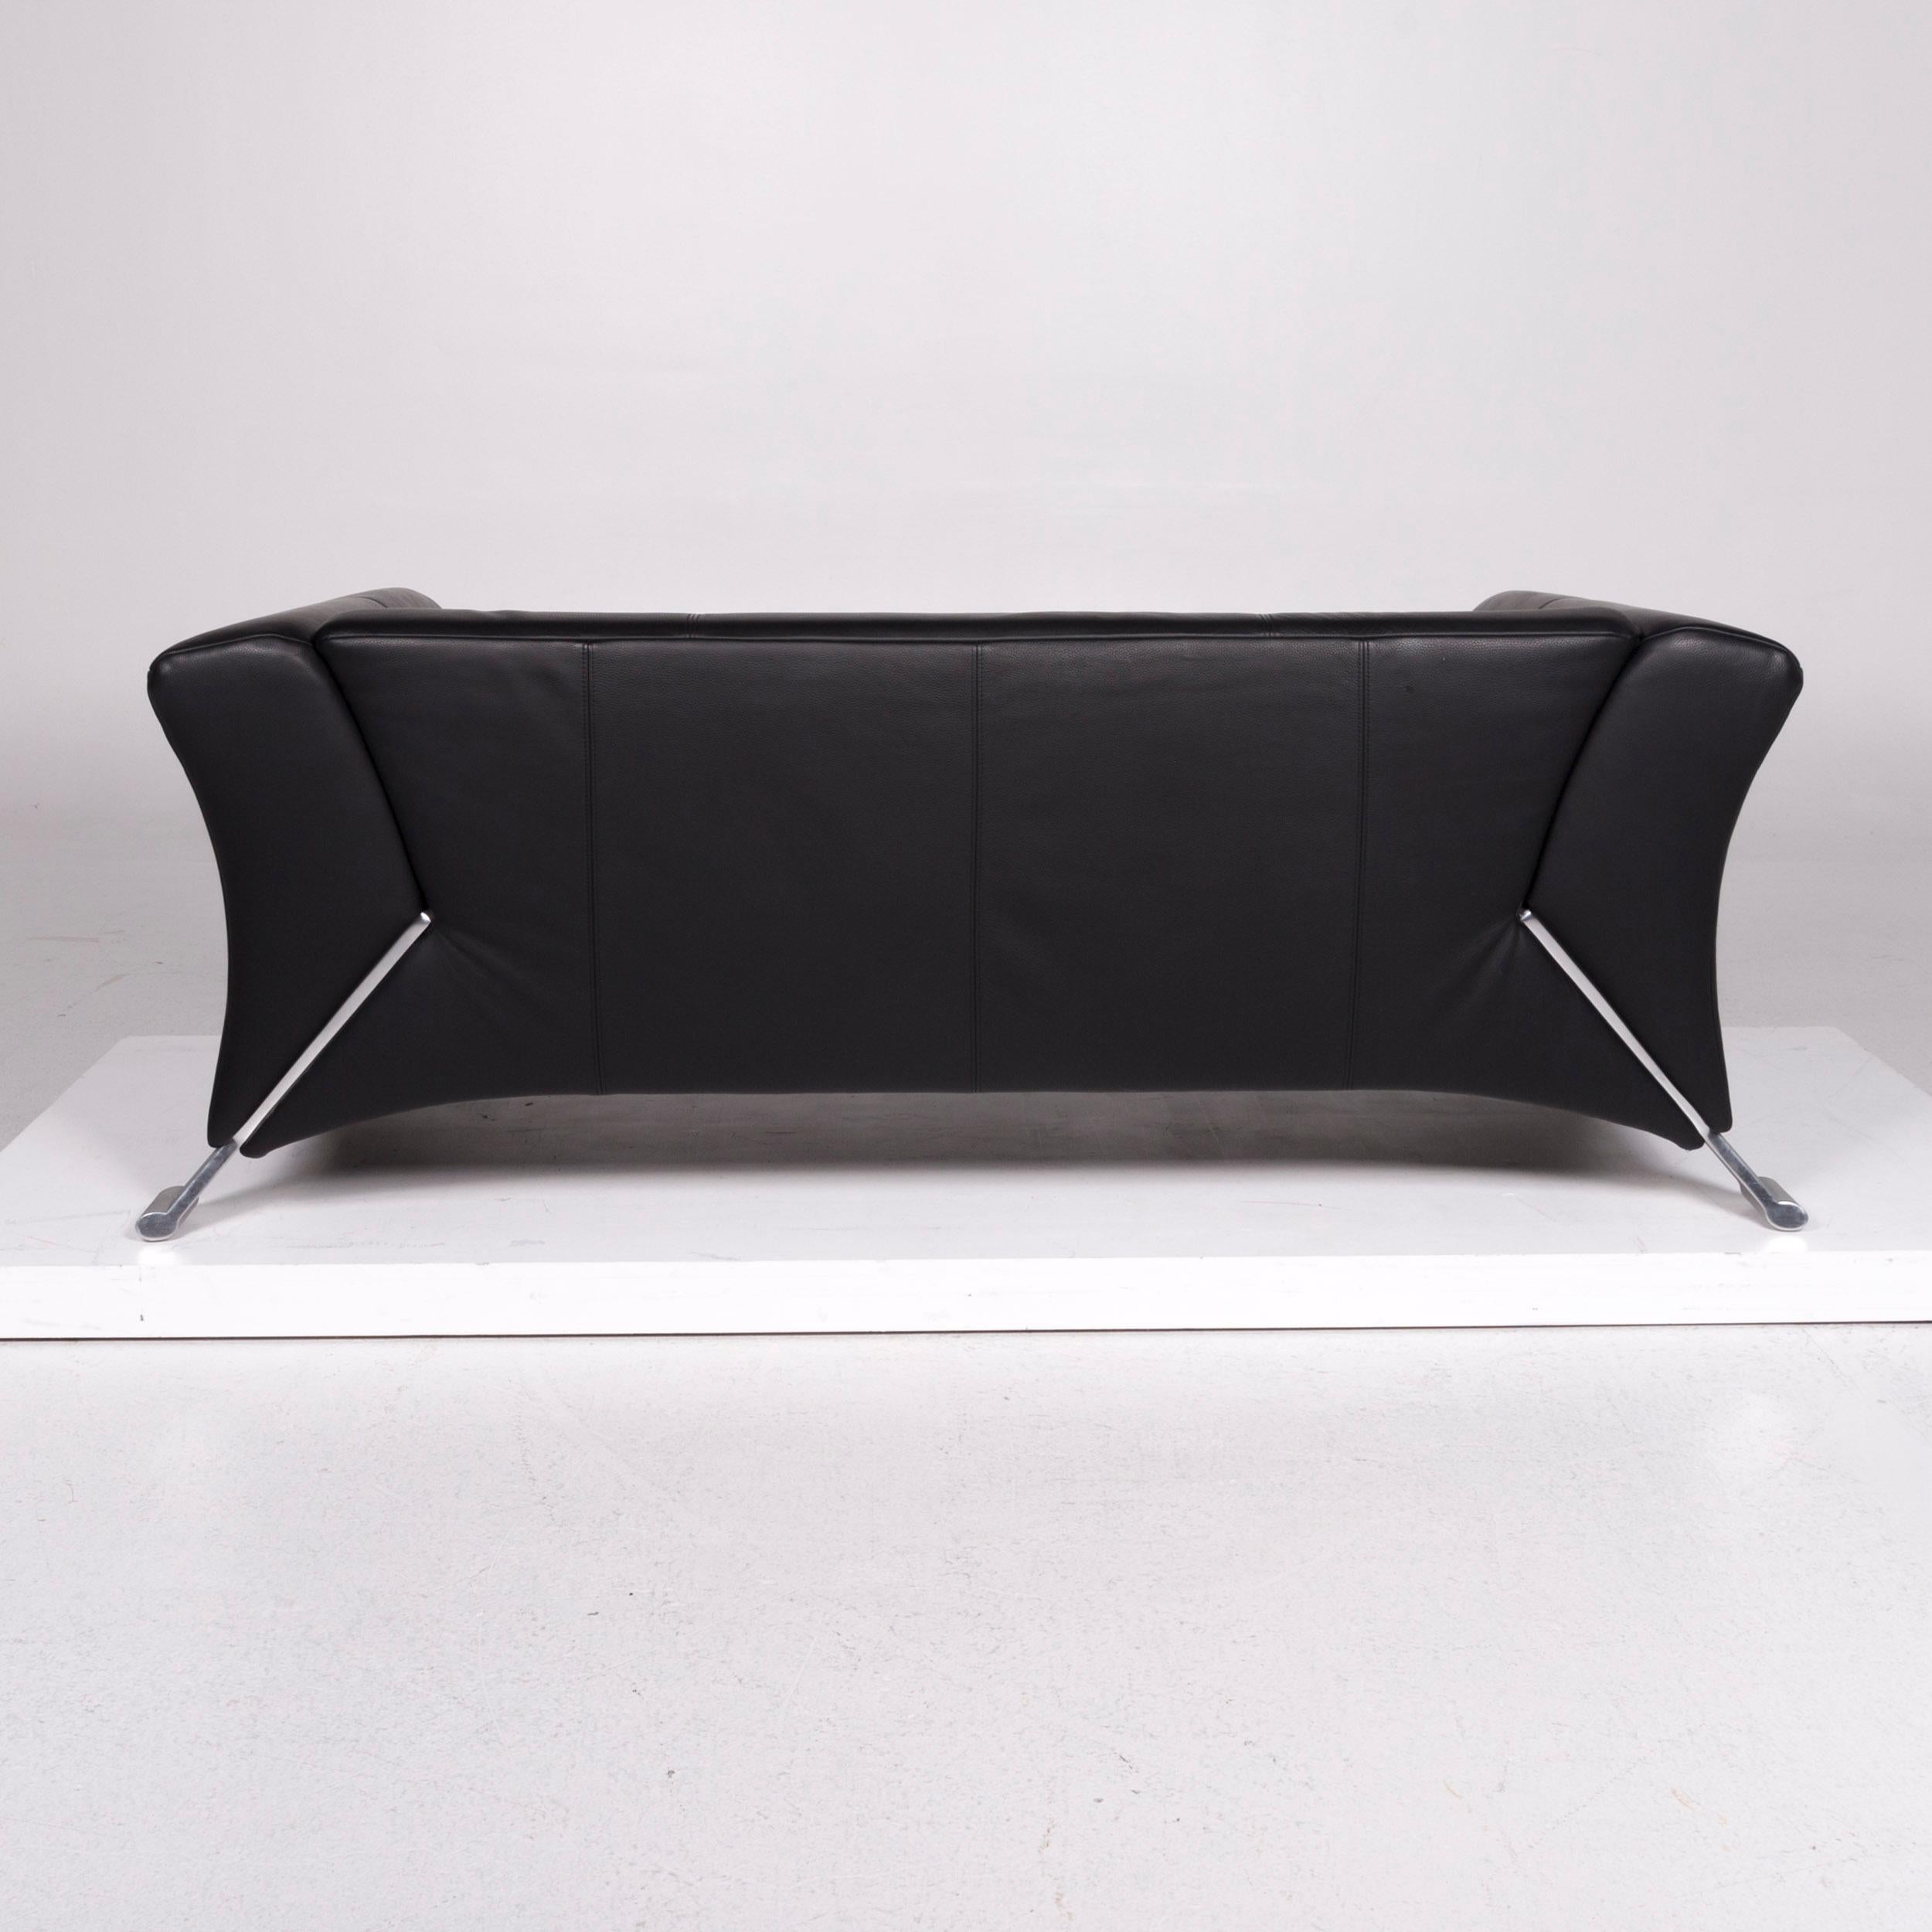 Rolf Benz 322 Leather Sofa Black Two-Seat For Sale 1